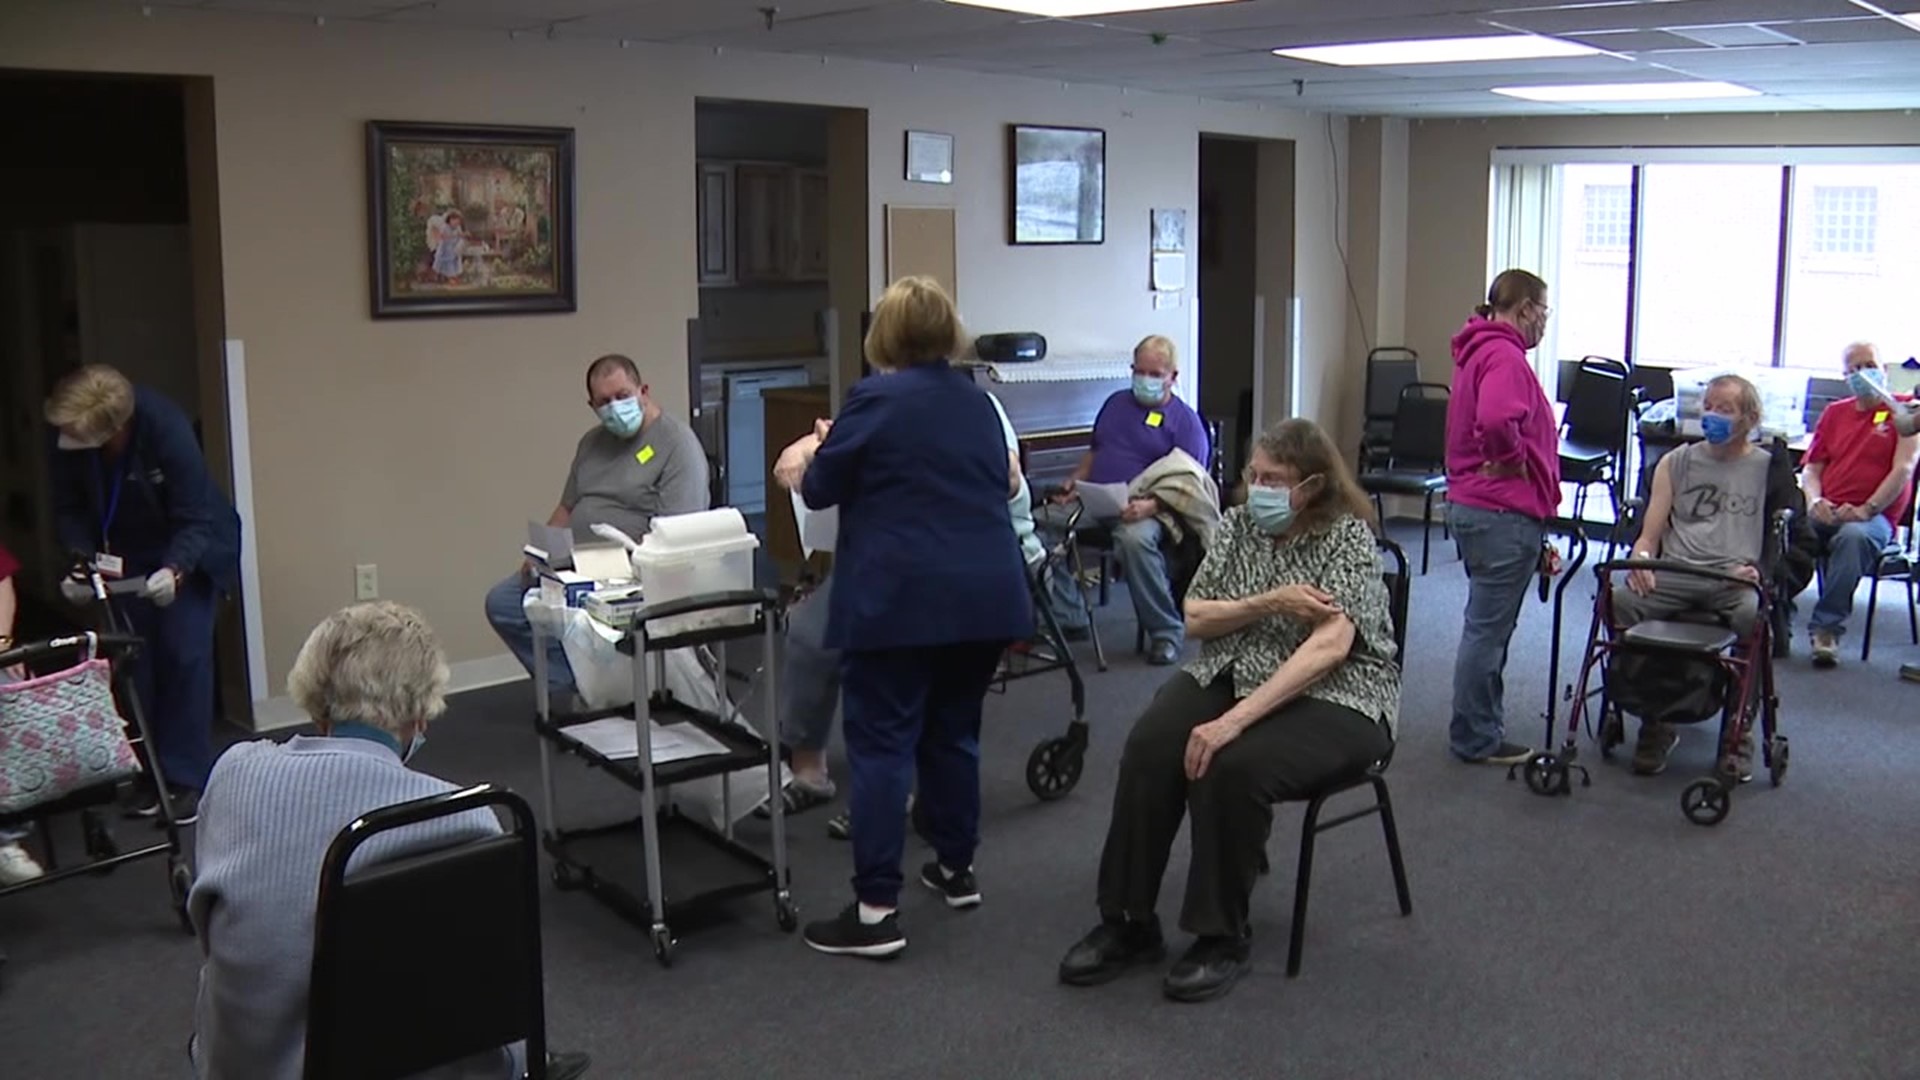 Around 300 senior citizens got their first dose of Moderna's COVID-19 vaccine in Carbon County.